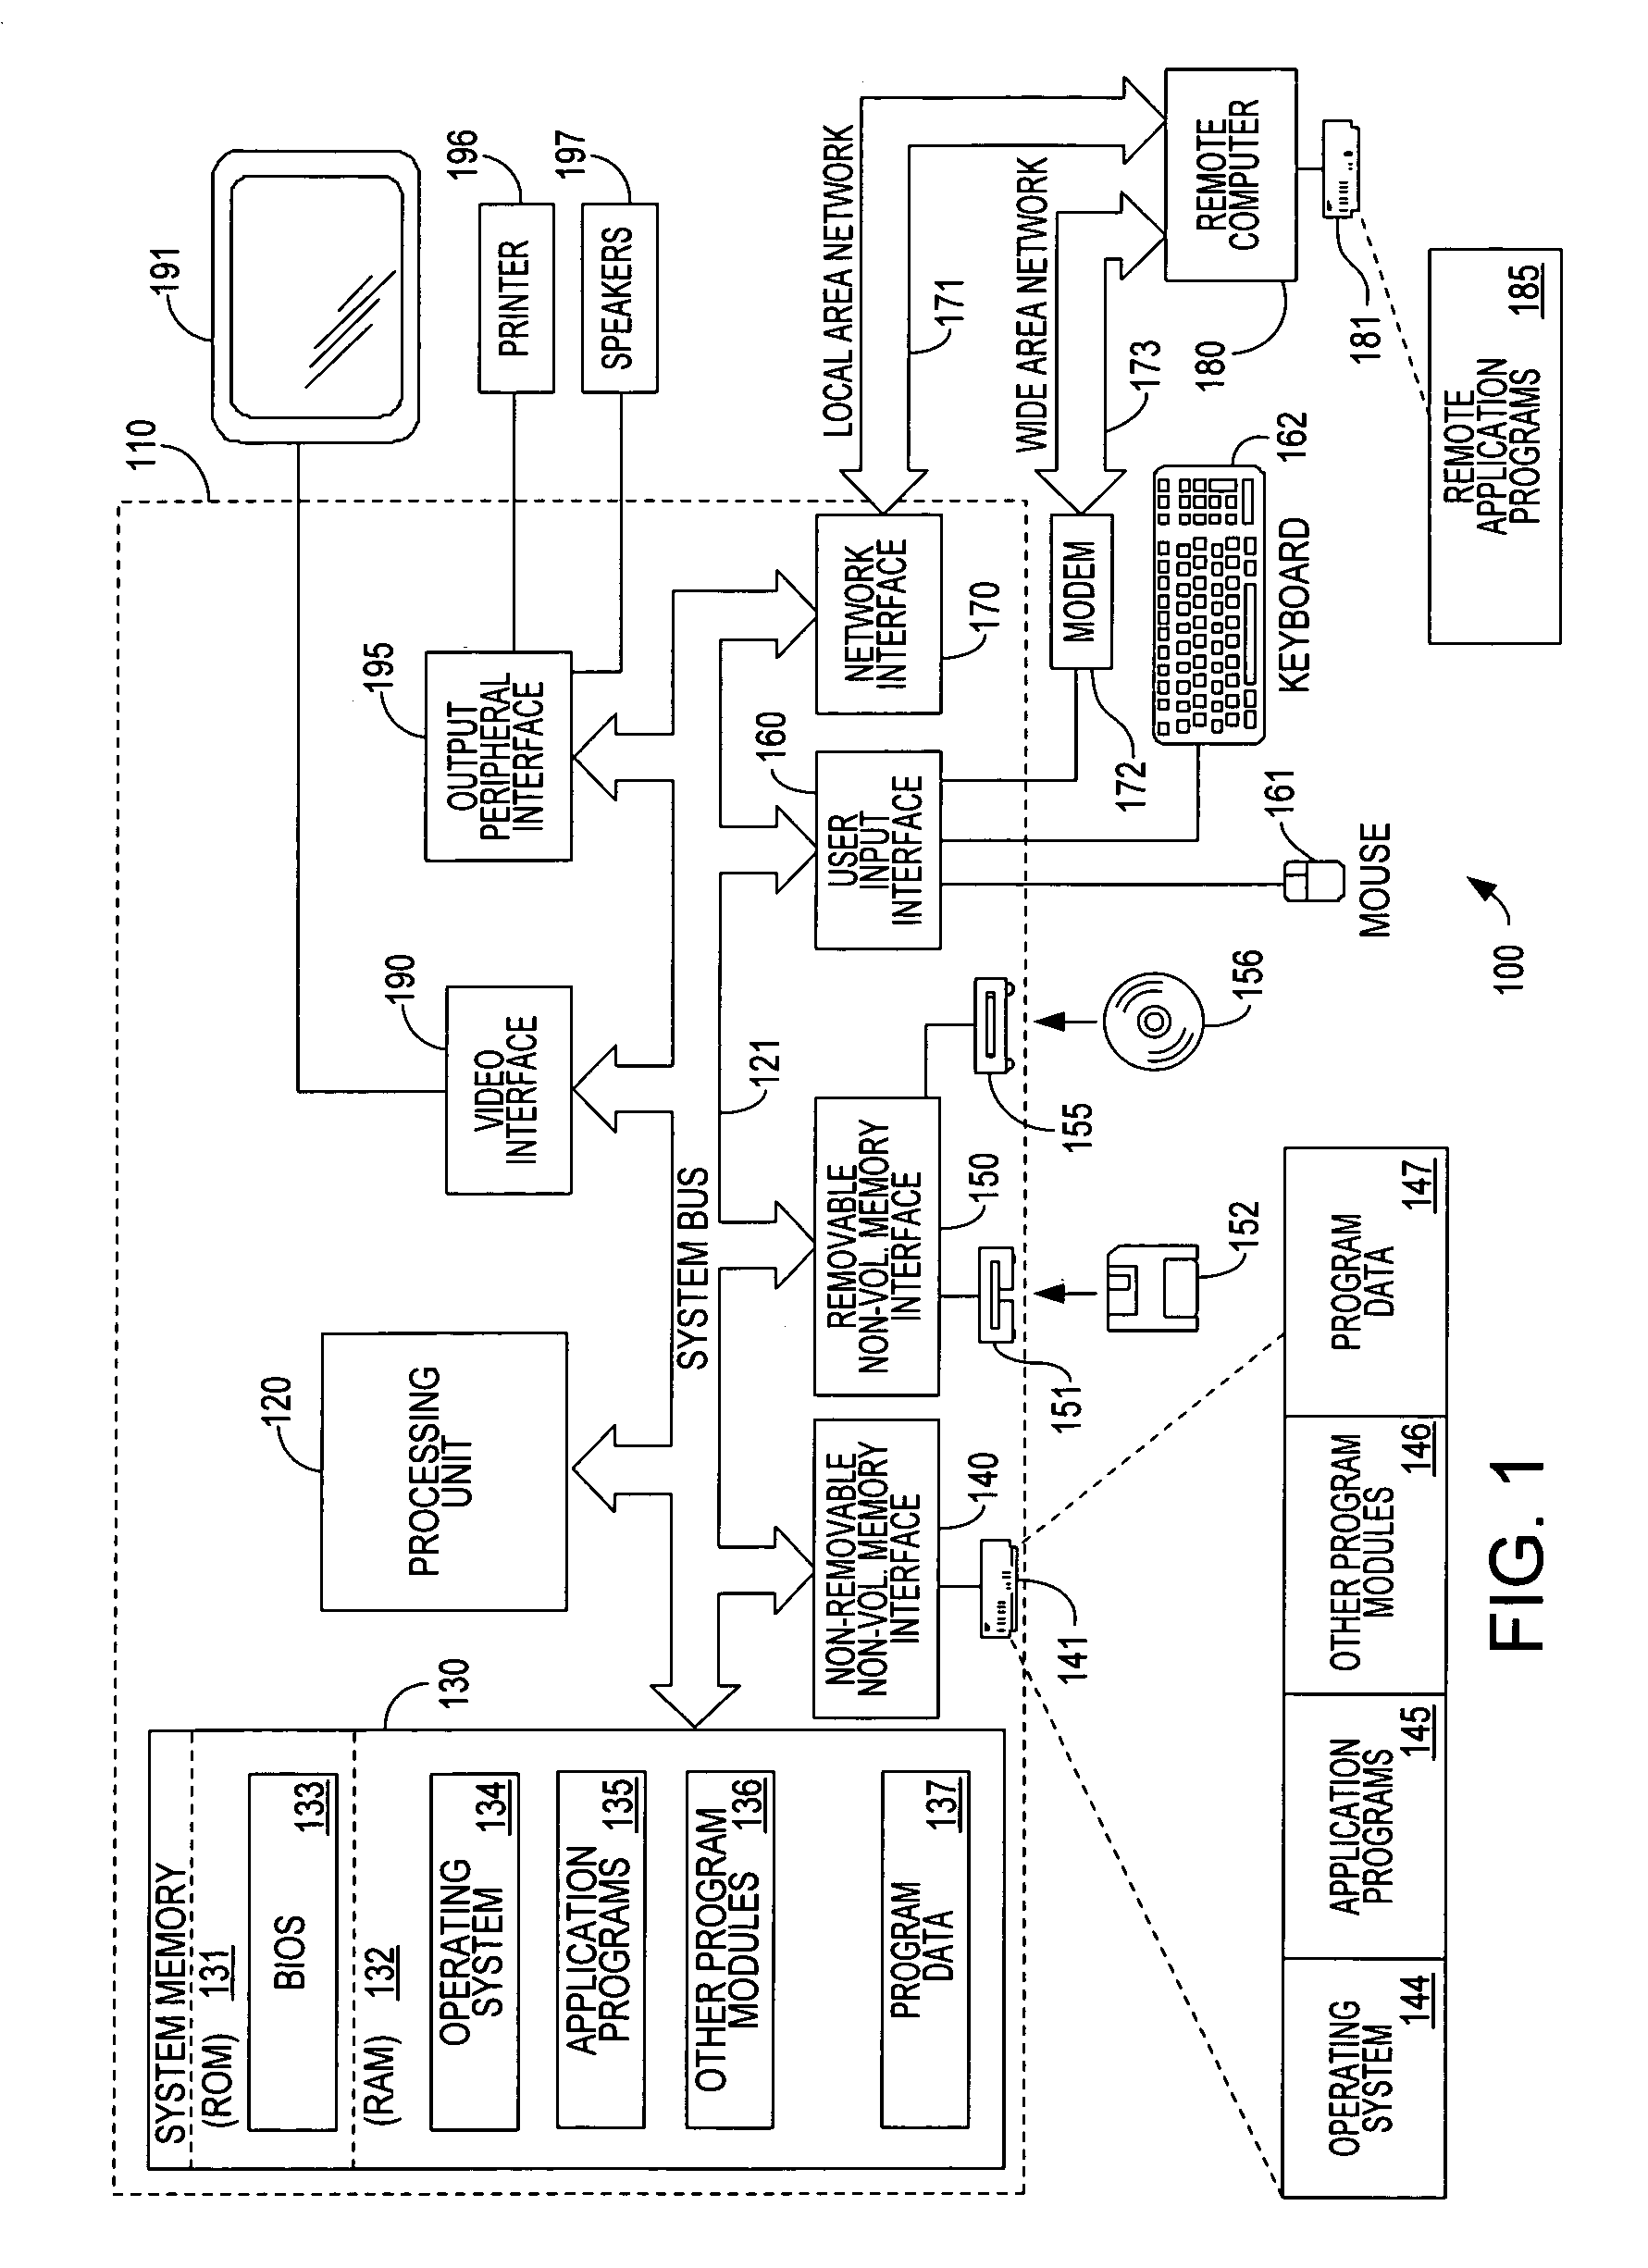 System and method for performing client-centric load balancing of multiple globally-dispersed servers